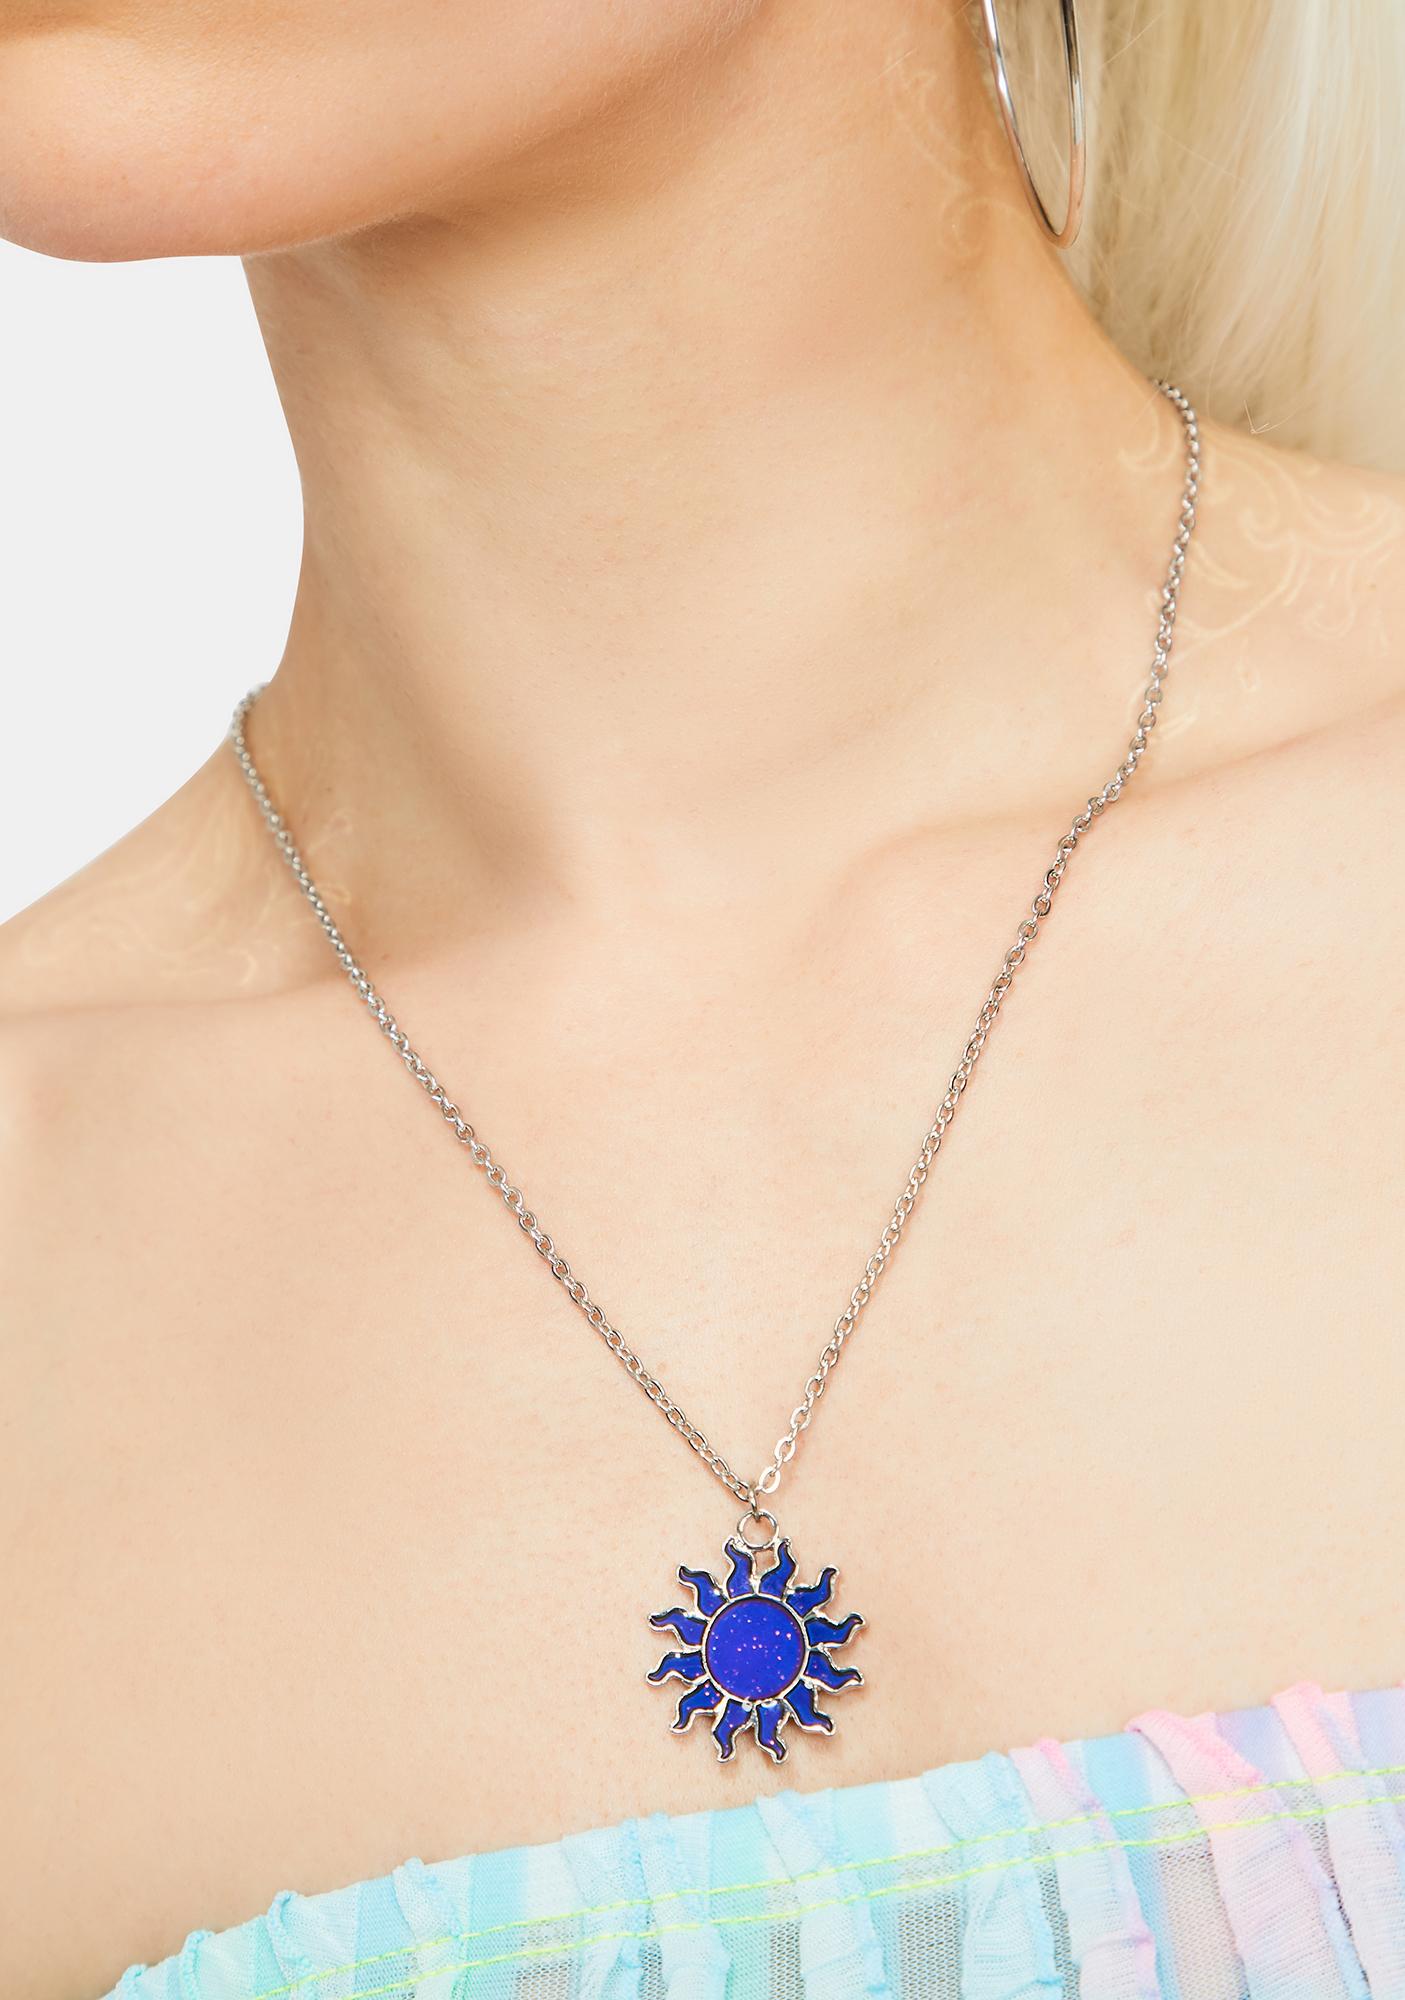 Mood Changing Sun Pendant Necklace 